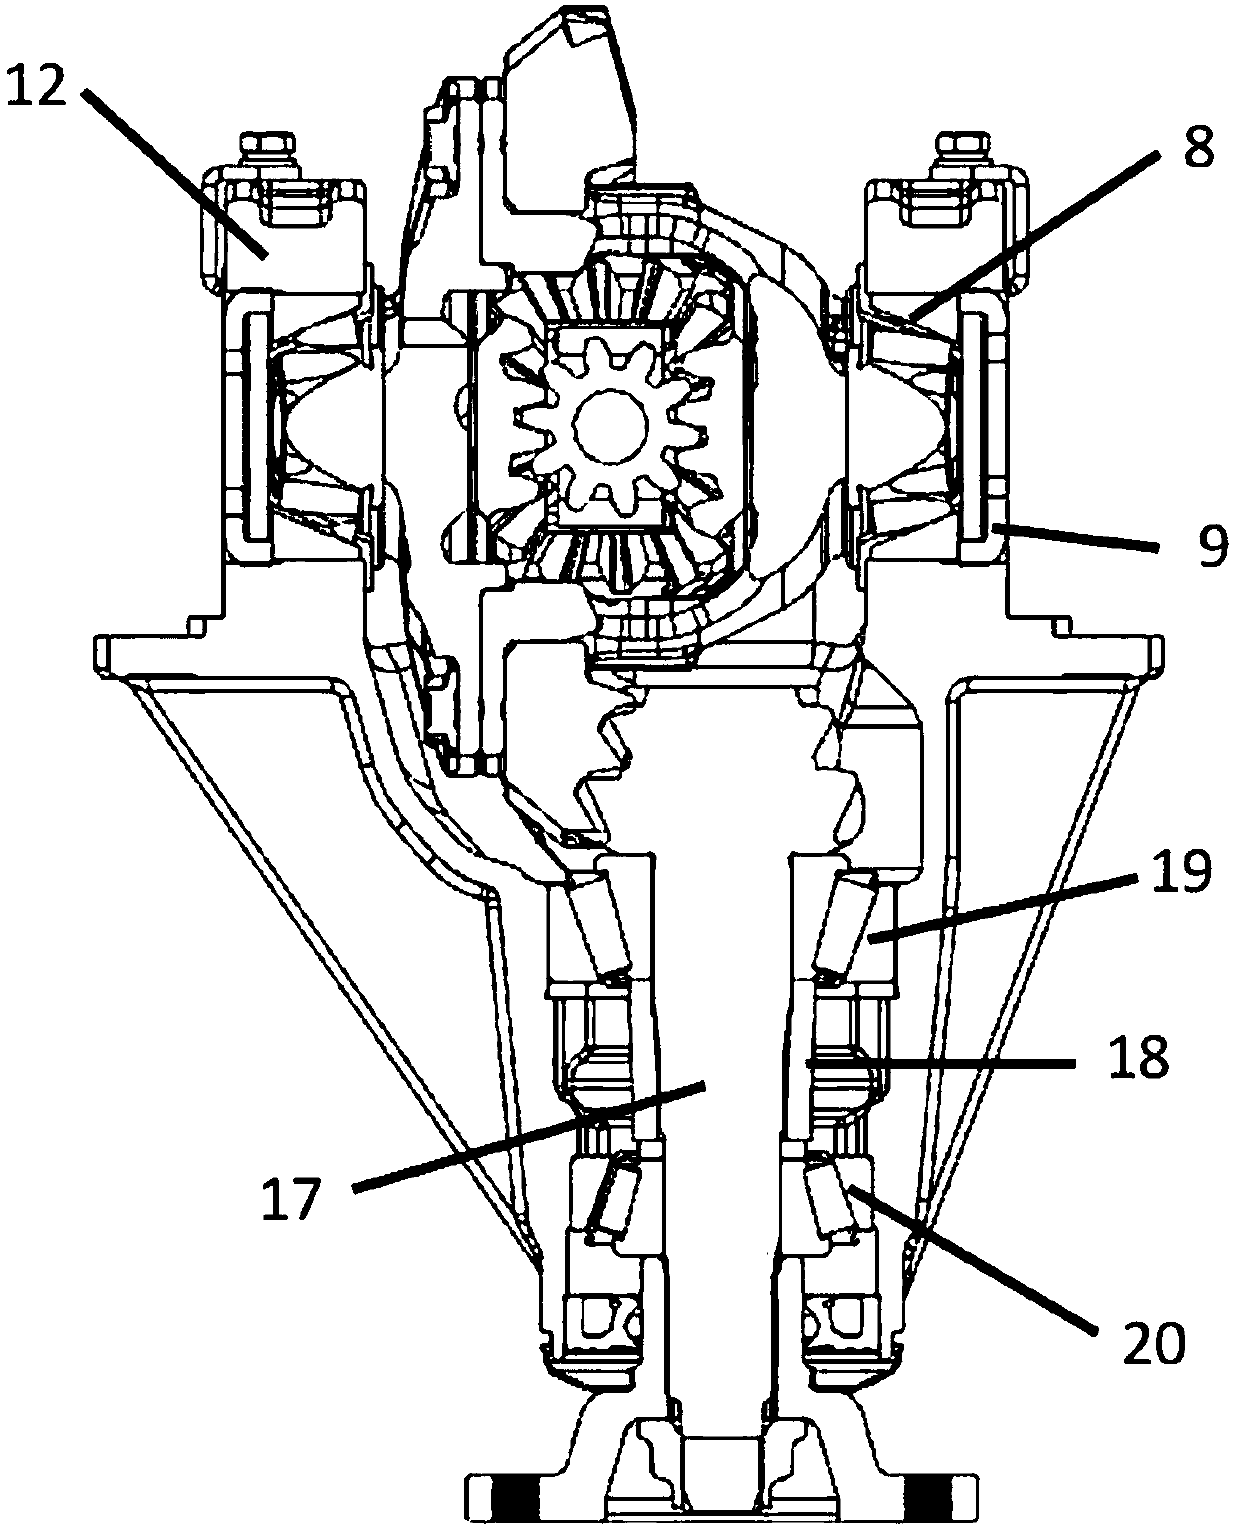 Automobile rear drive axle assembly